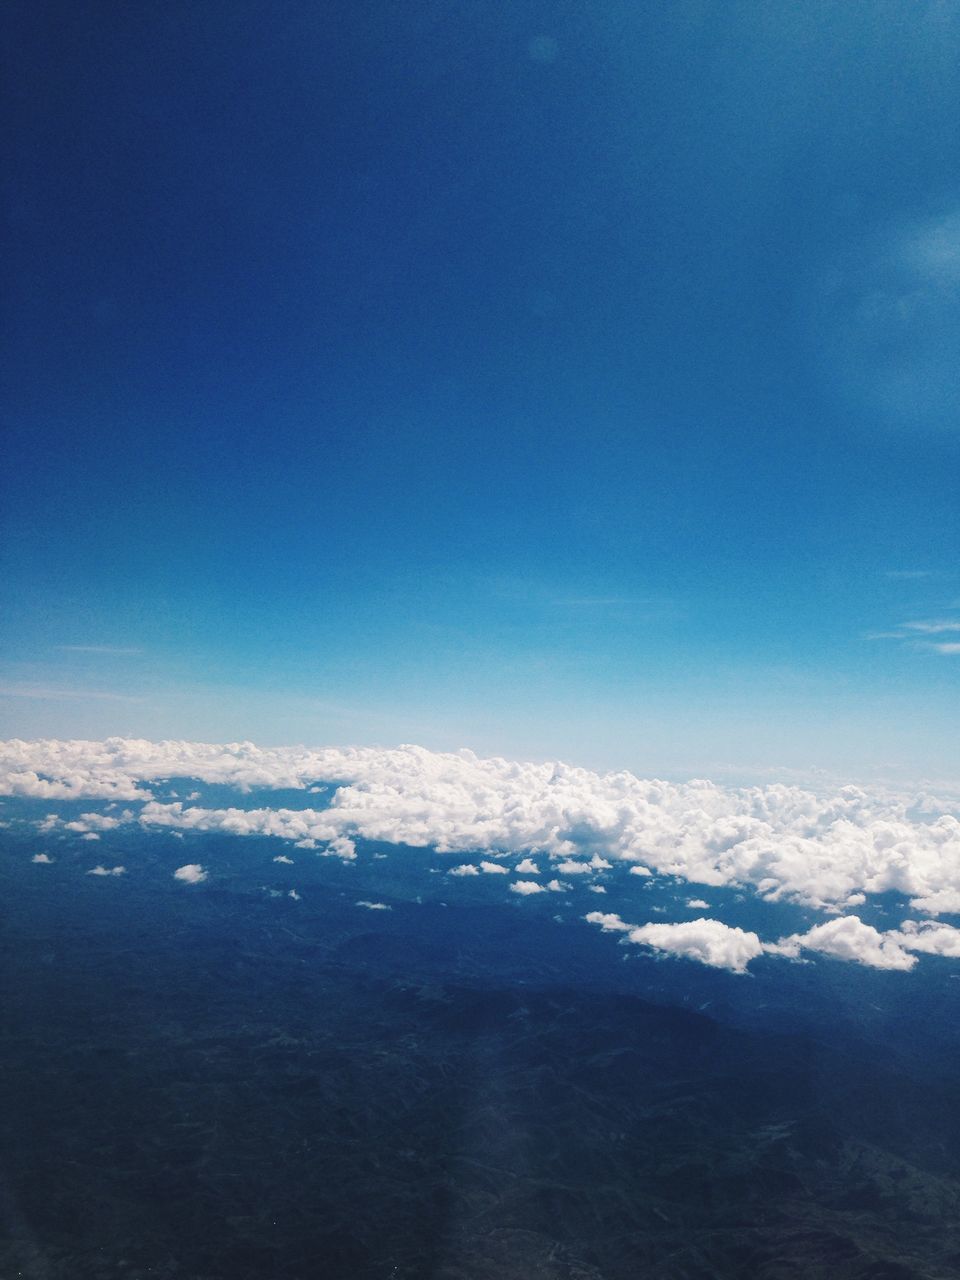 blue, scenics, tranquil scene, beauty in nature, aerial view, cloudscape, tranquility, copy space, majestic, nature, sky, clear sky, idyllic, environment, cloud - sky, day, the natural world, cloud, sea, ethereal, vibrant color, atmosphere, outdoors, softness, dreamlike, distant, heaven, no people, above, non-urban scene